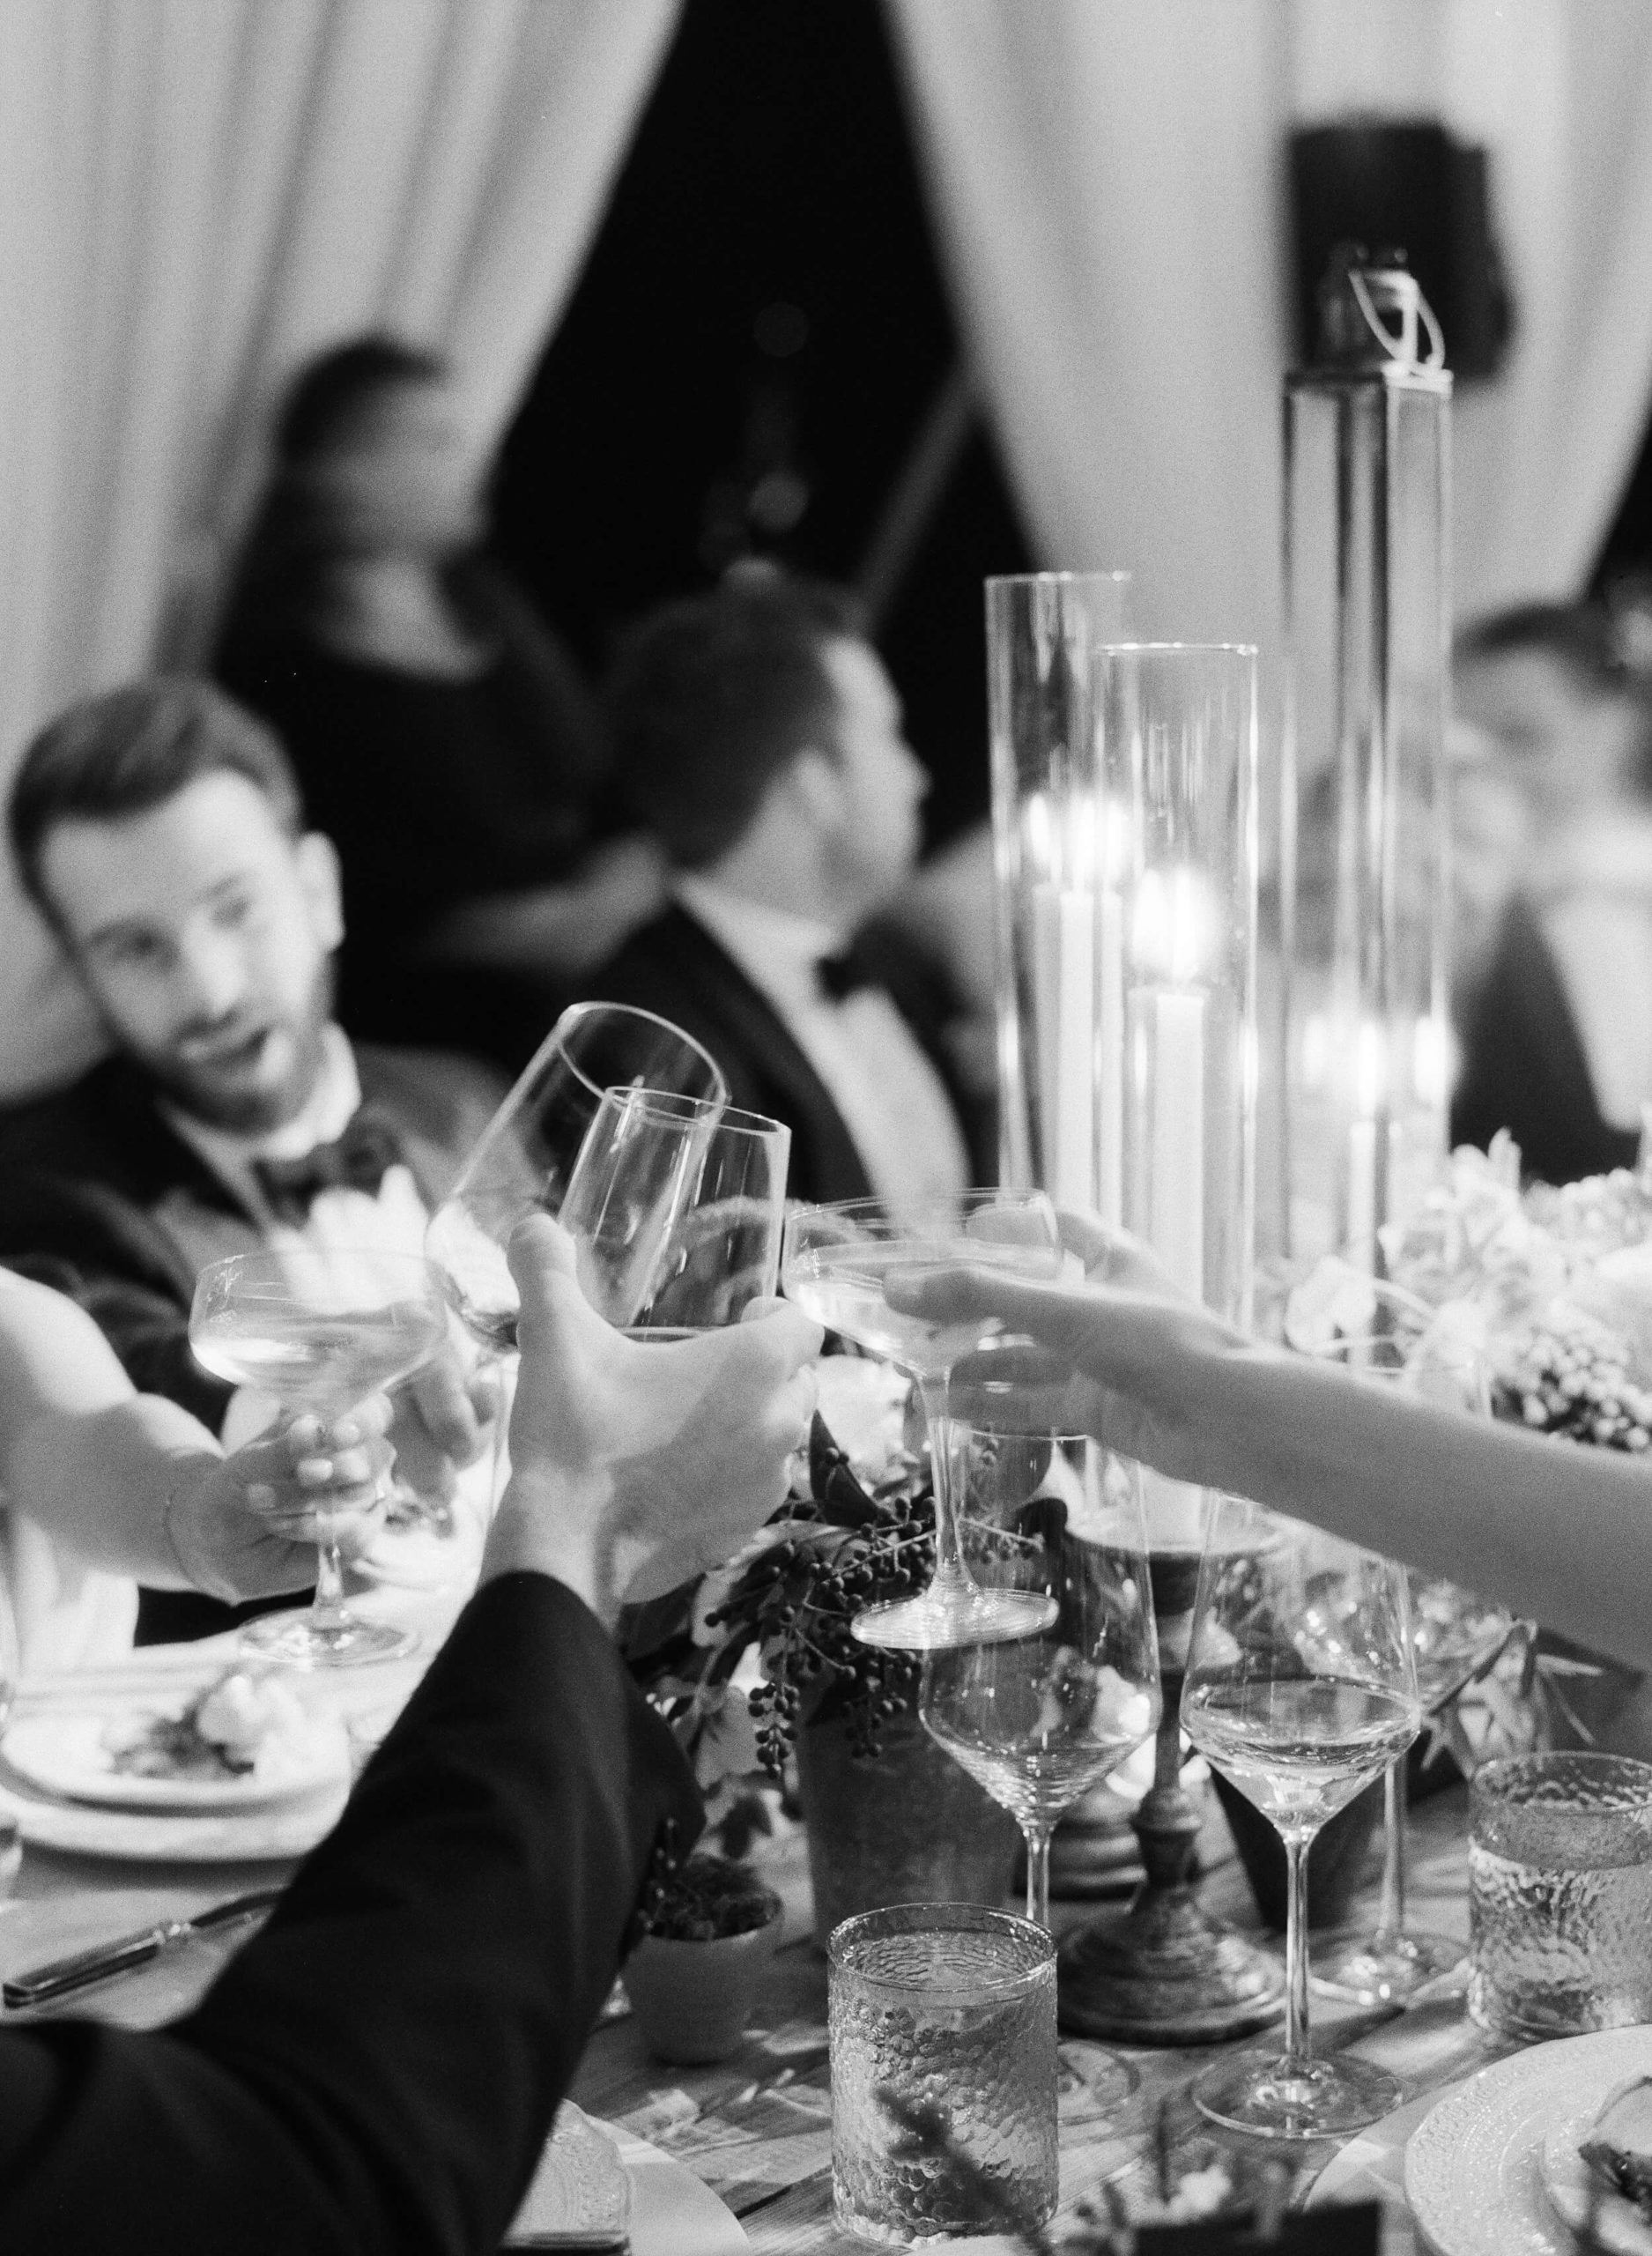 guests raise their glasses to toast